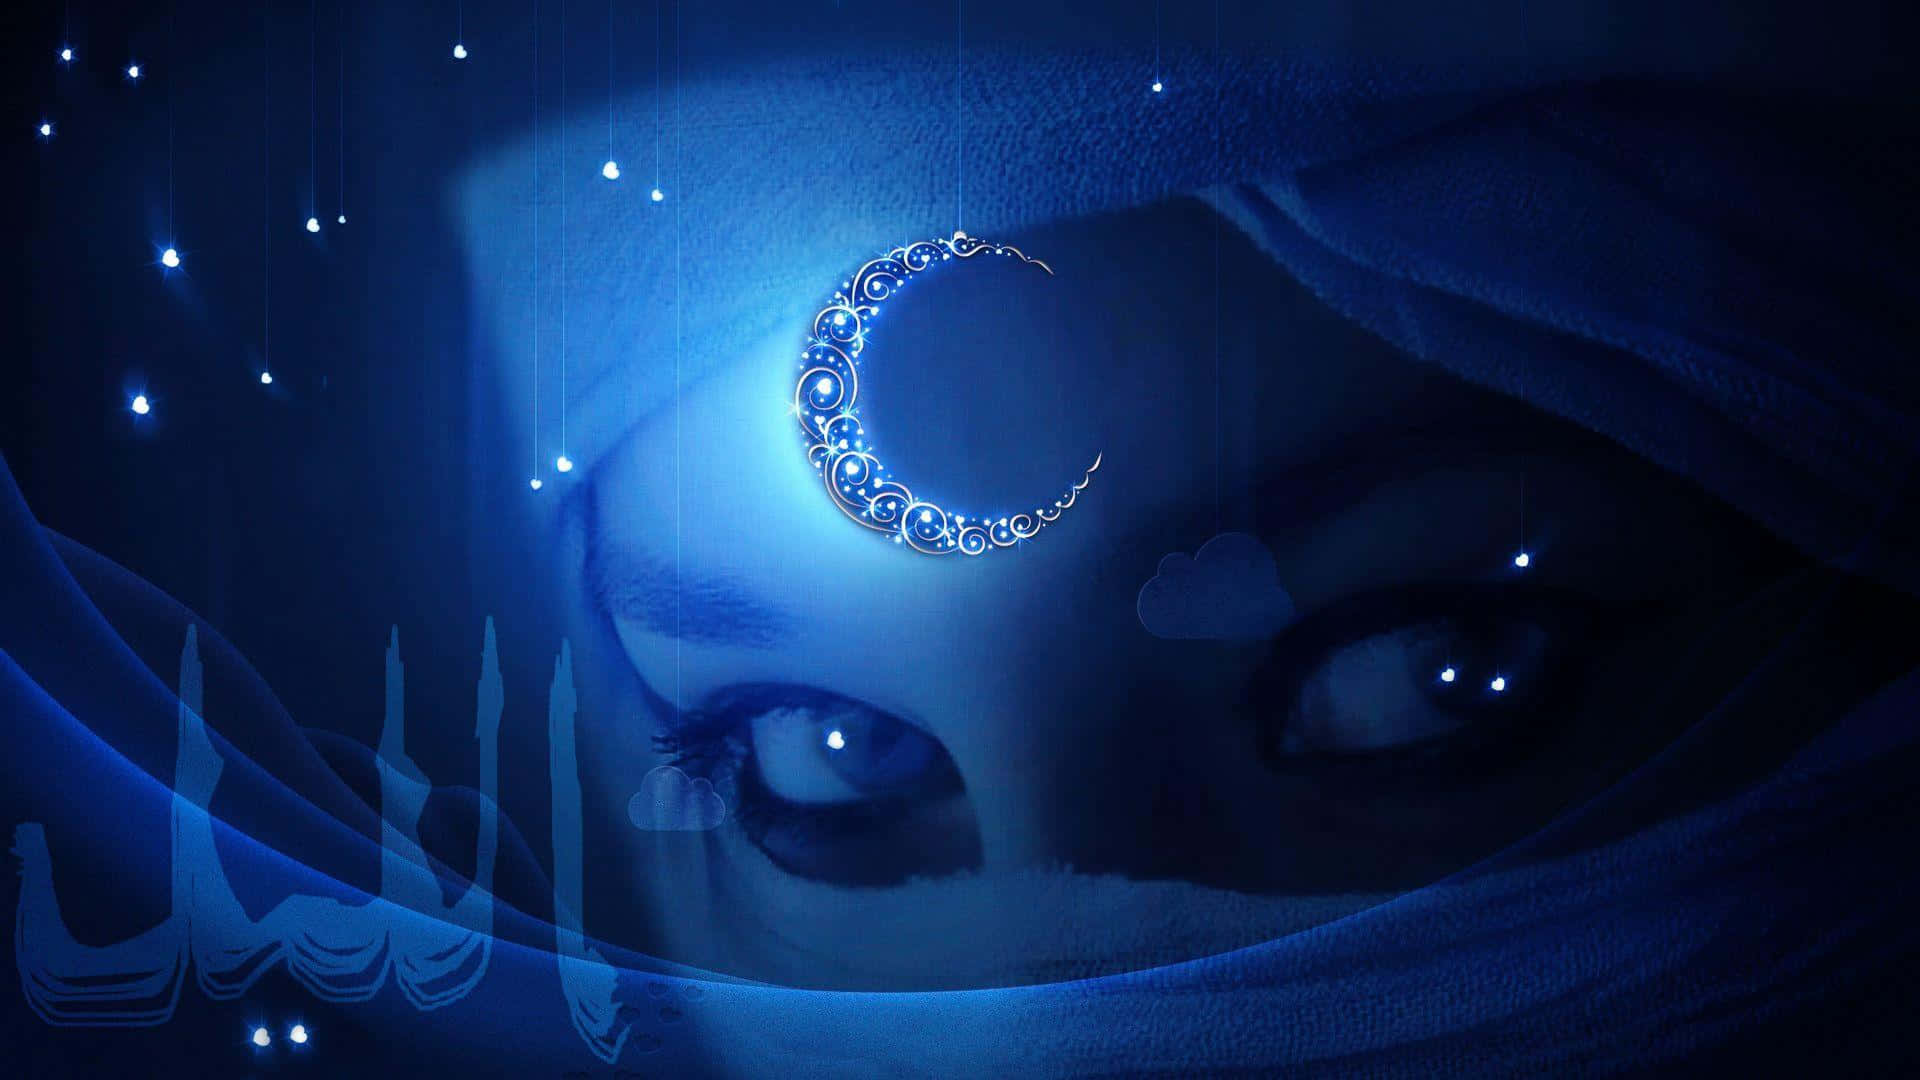 A Woman With A Crescent Moon And Stars On Her Face Wallpaper